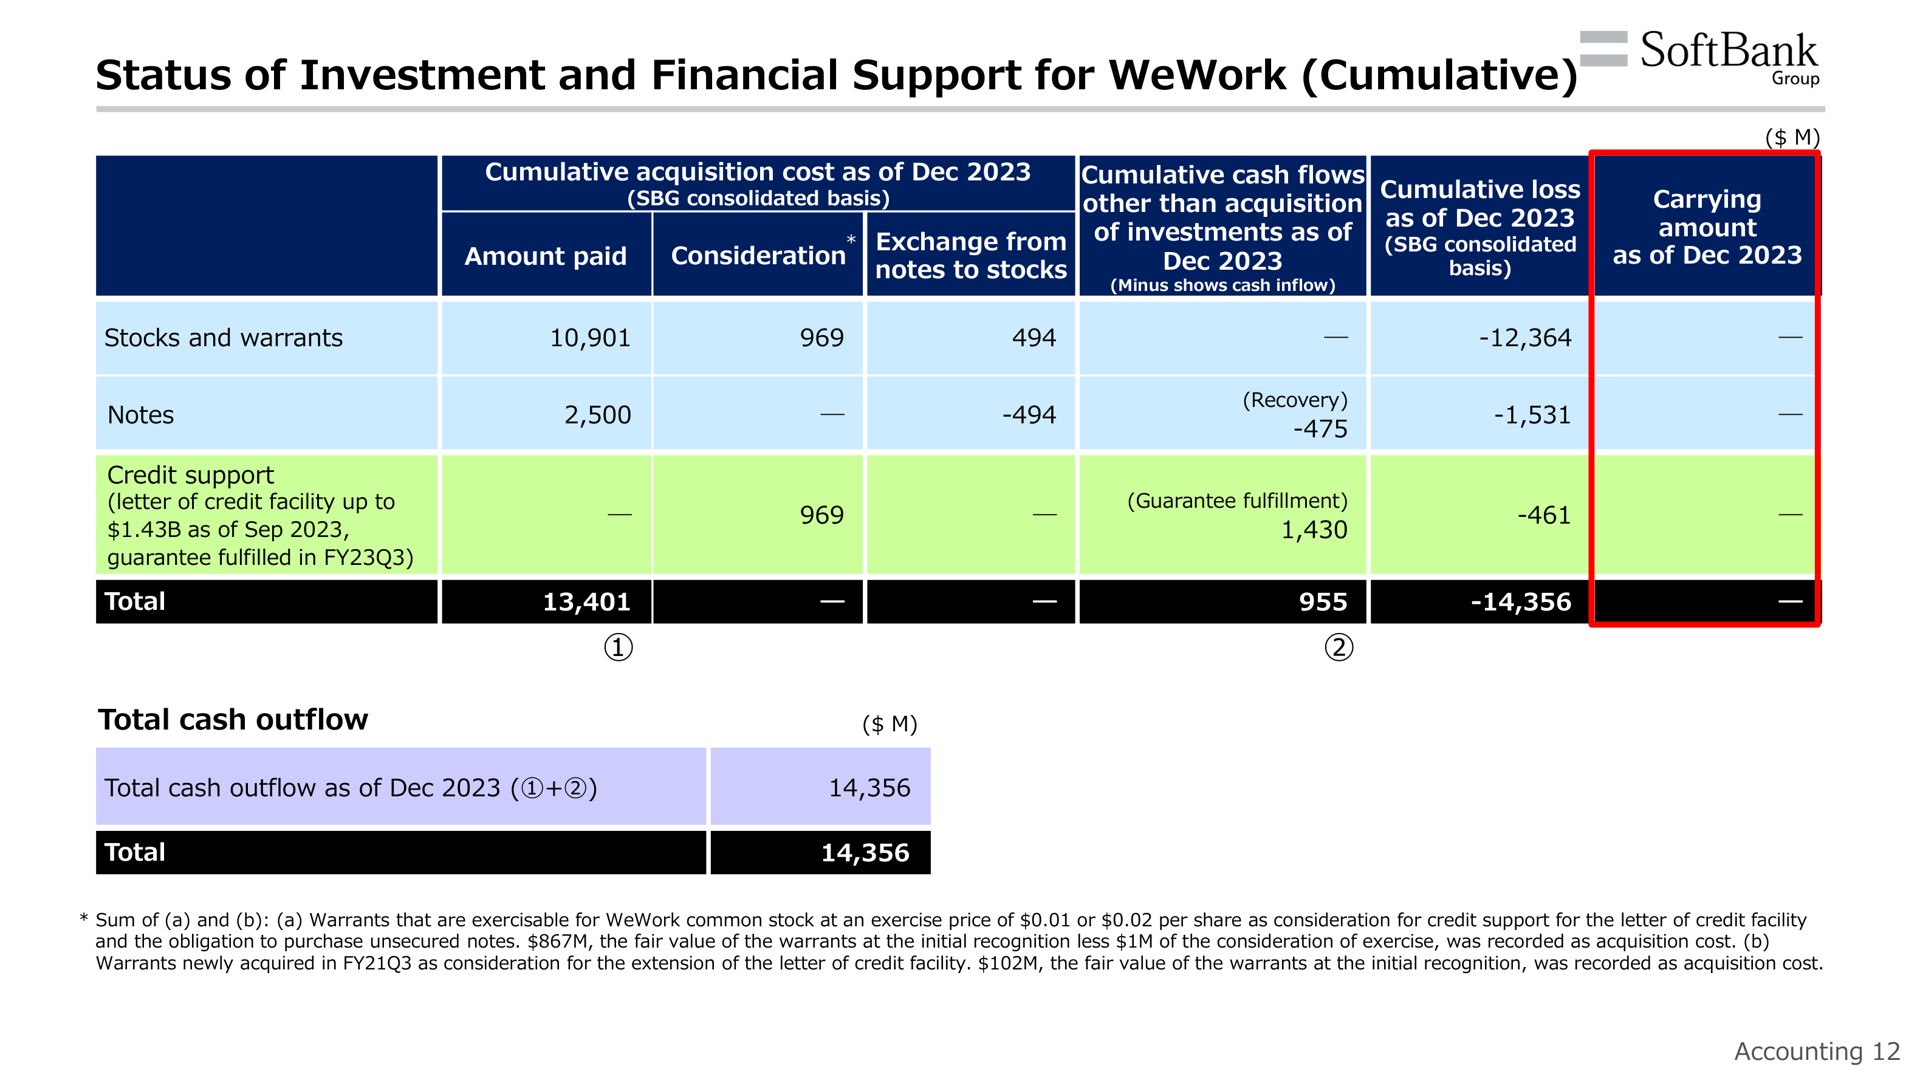 status of investment and financial support for cumulative | SoftBank